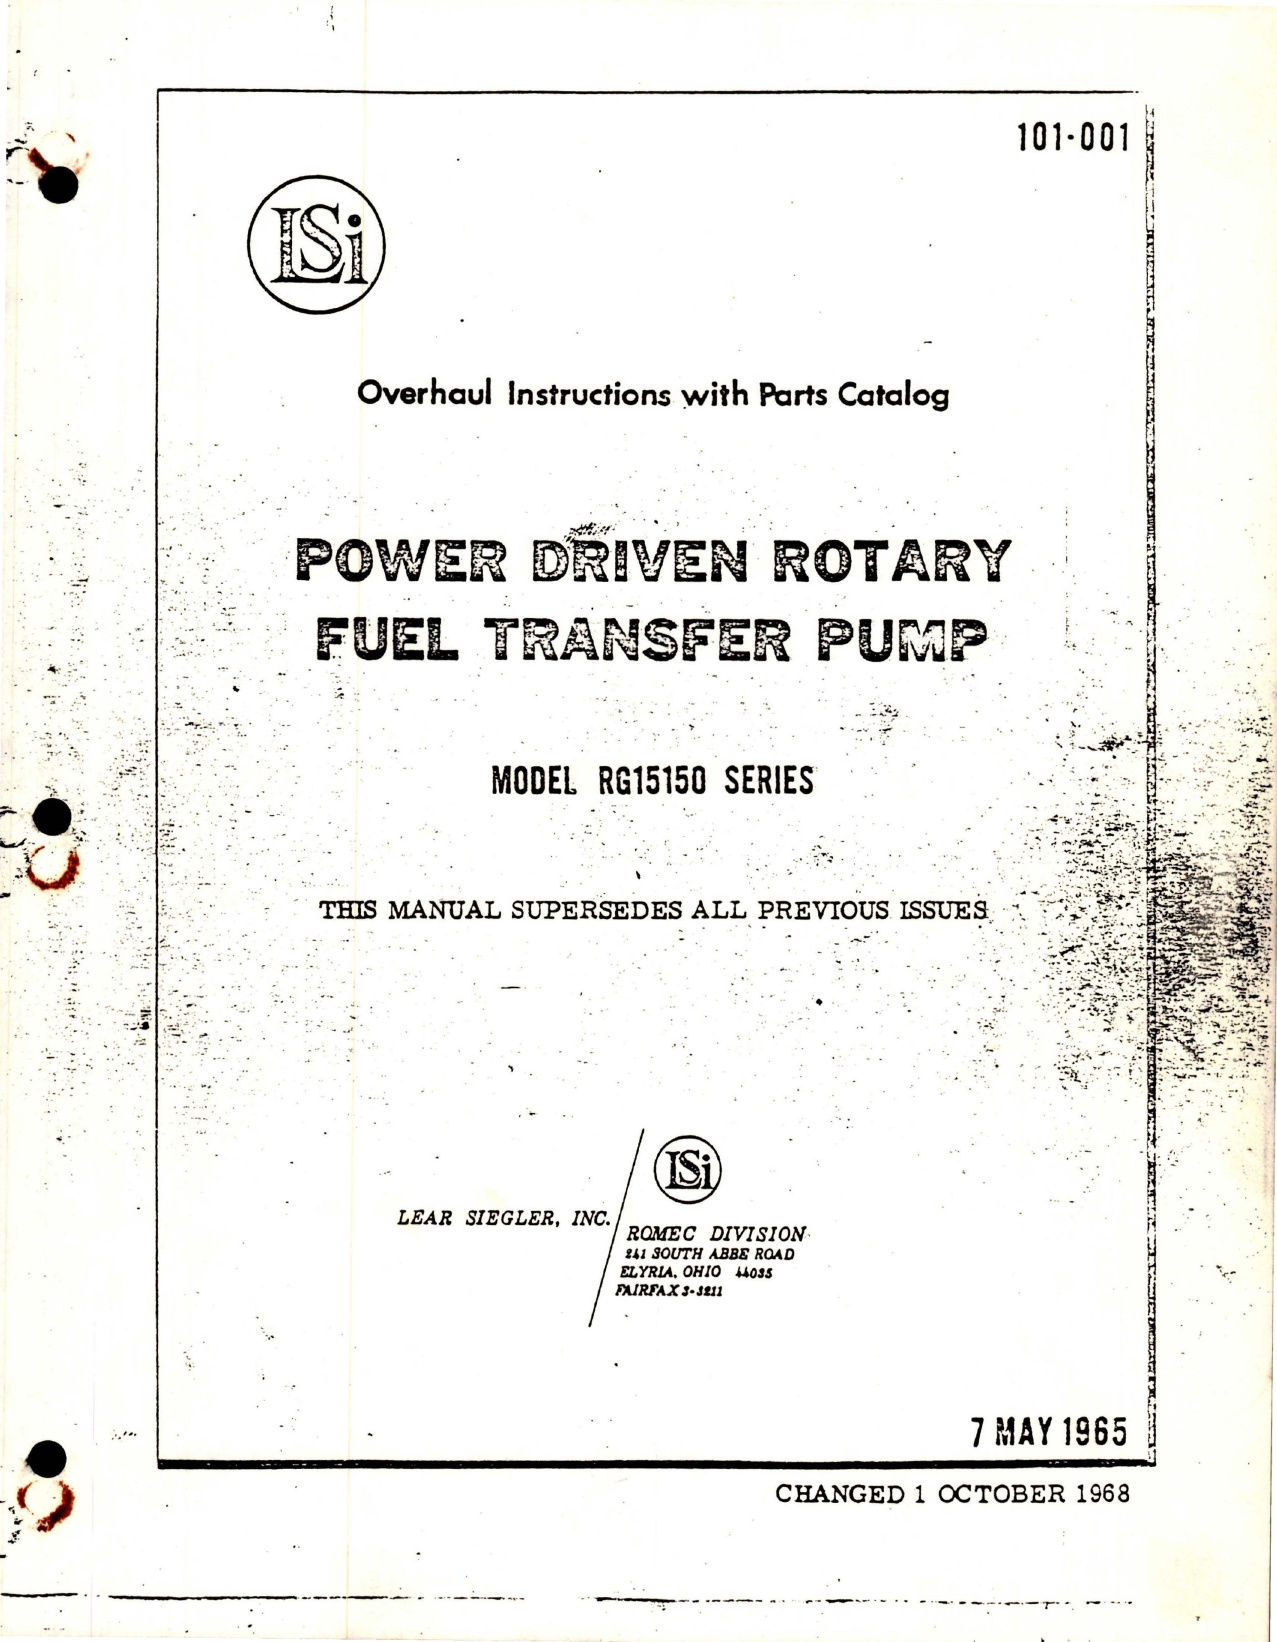 Sample page 1 from AirCorps Library document: Overhaul Instructions with Parts Catalog for Power Driven Rotary Fuel Transfer Pump - Model RG15150 